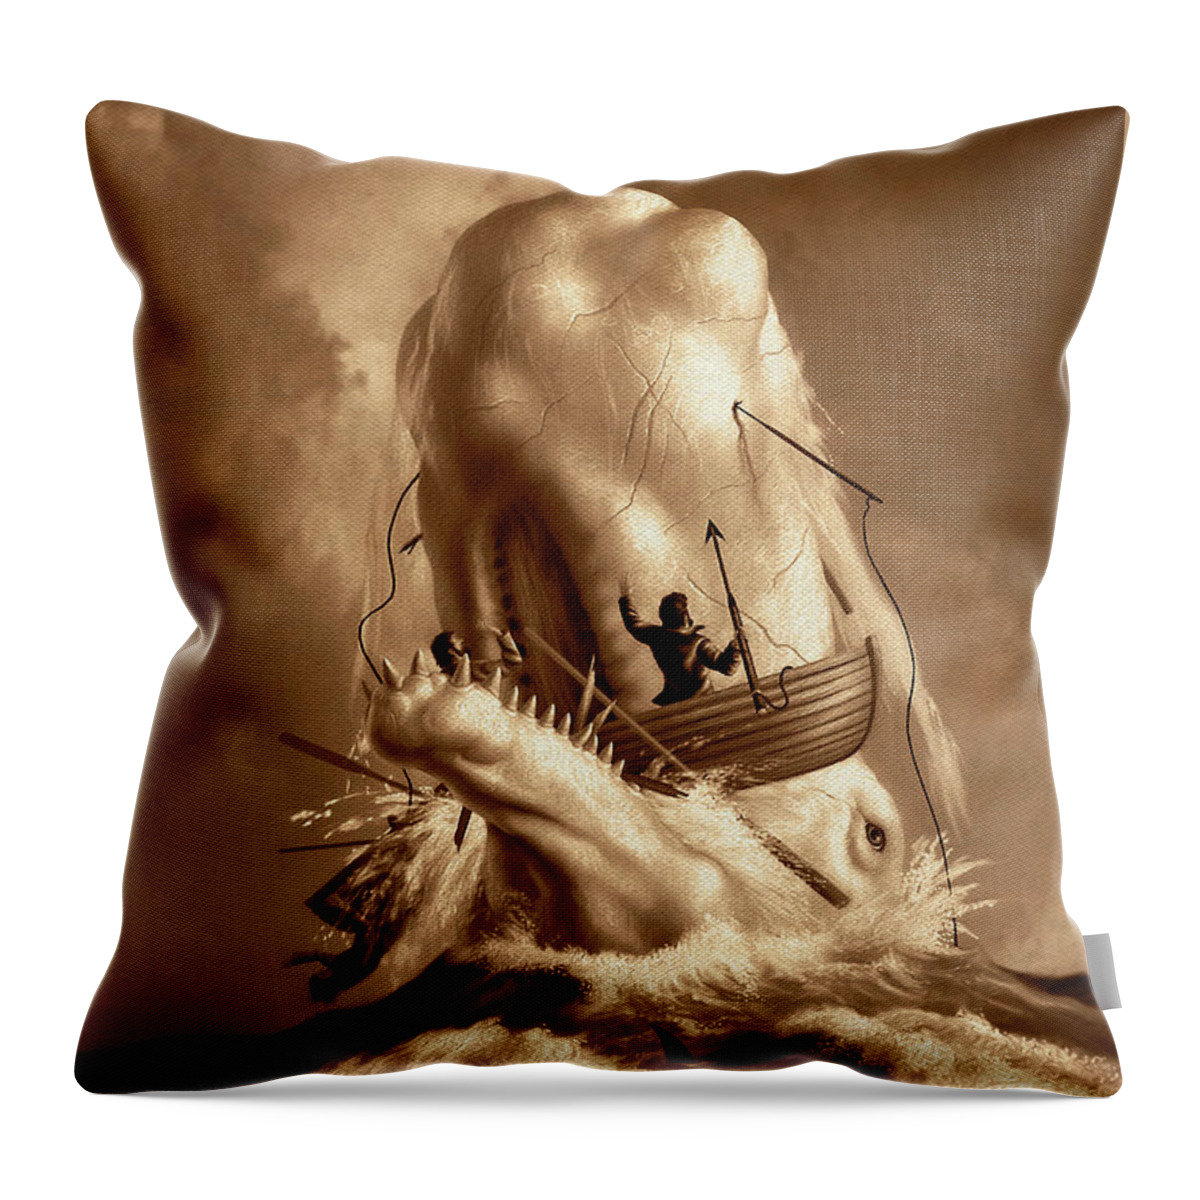 Moby Dick Throw Pillow featuring the digital art Moby Dick 2 by Jerry LoFaro